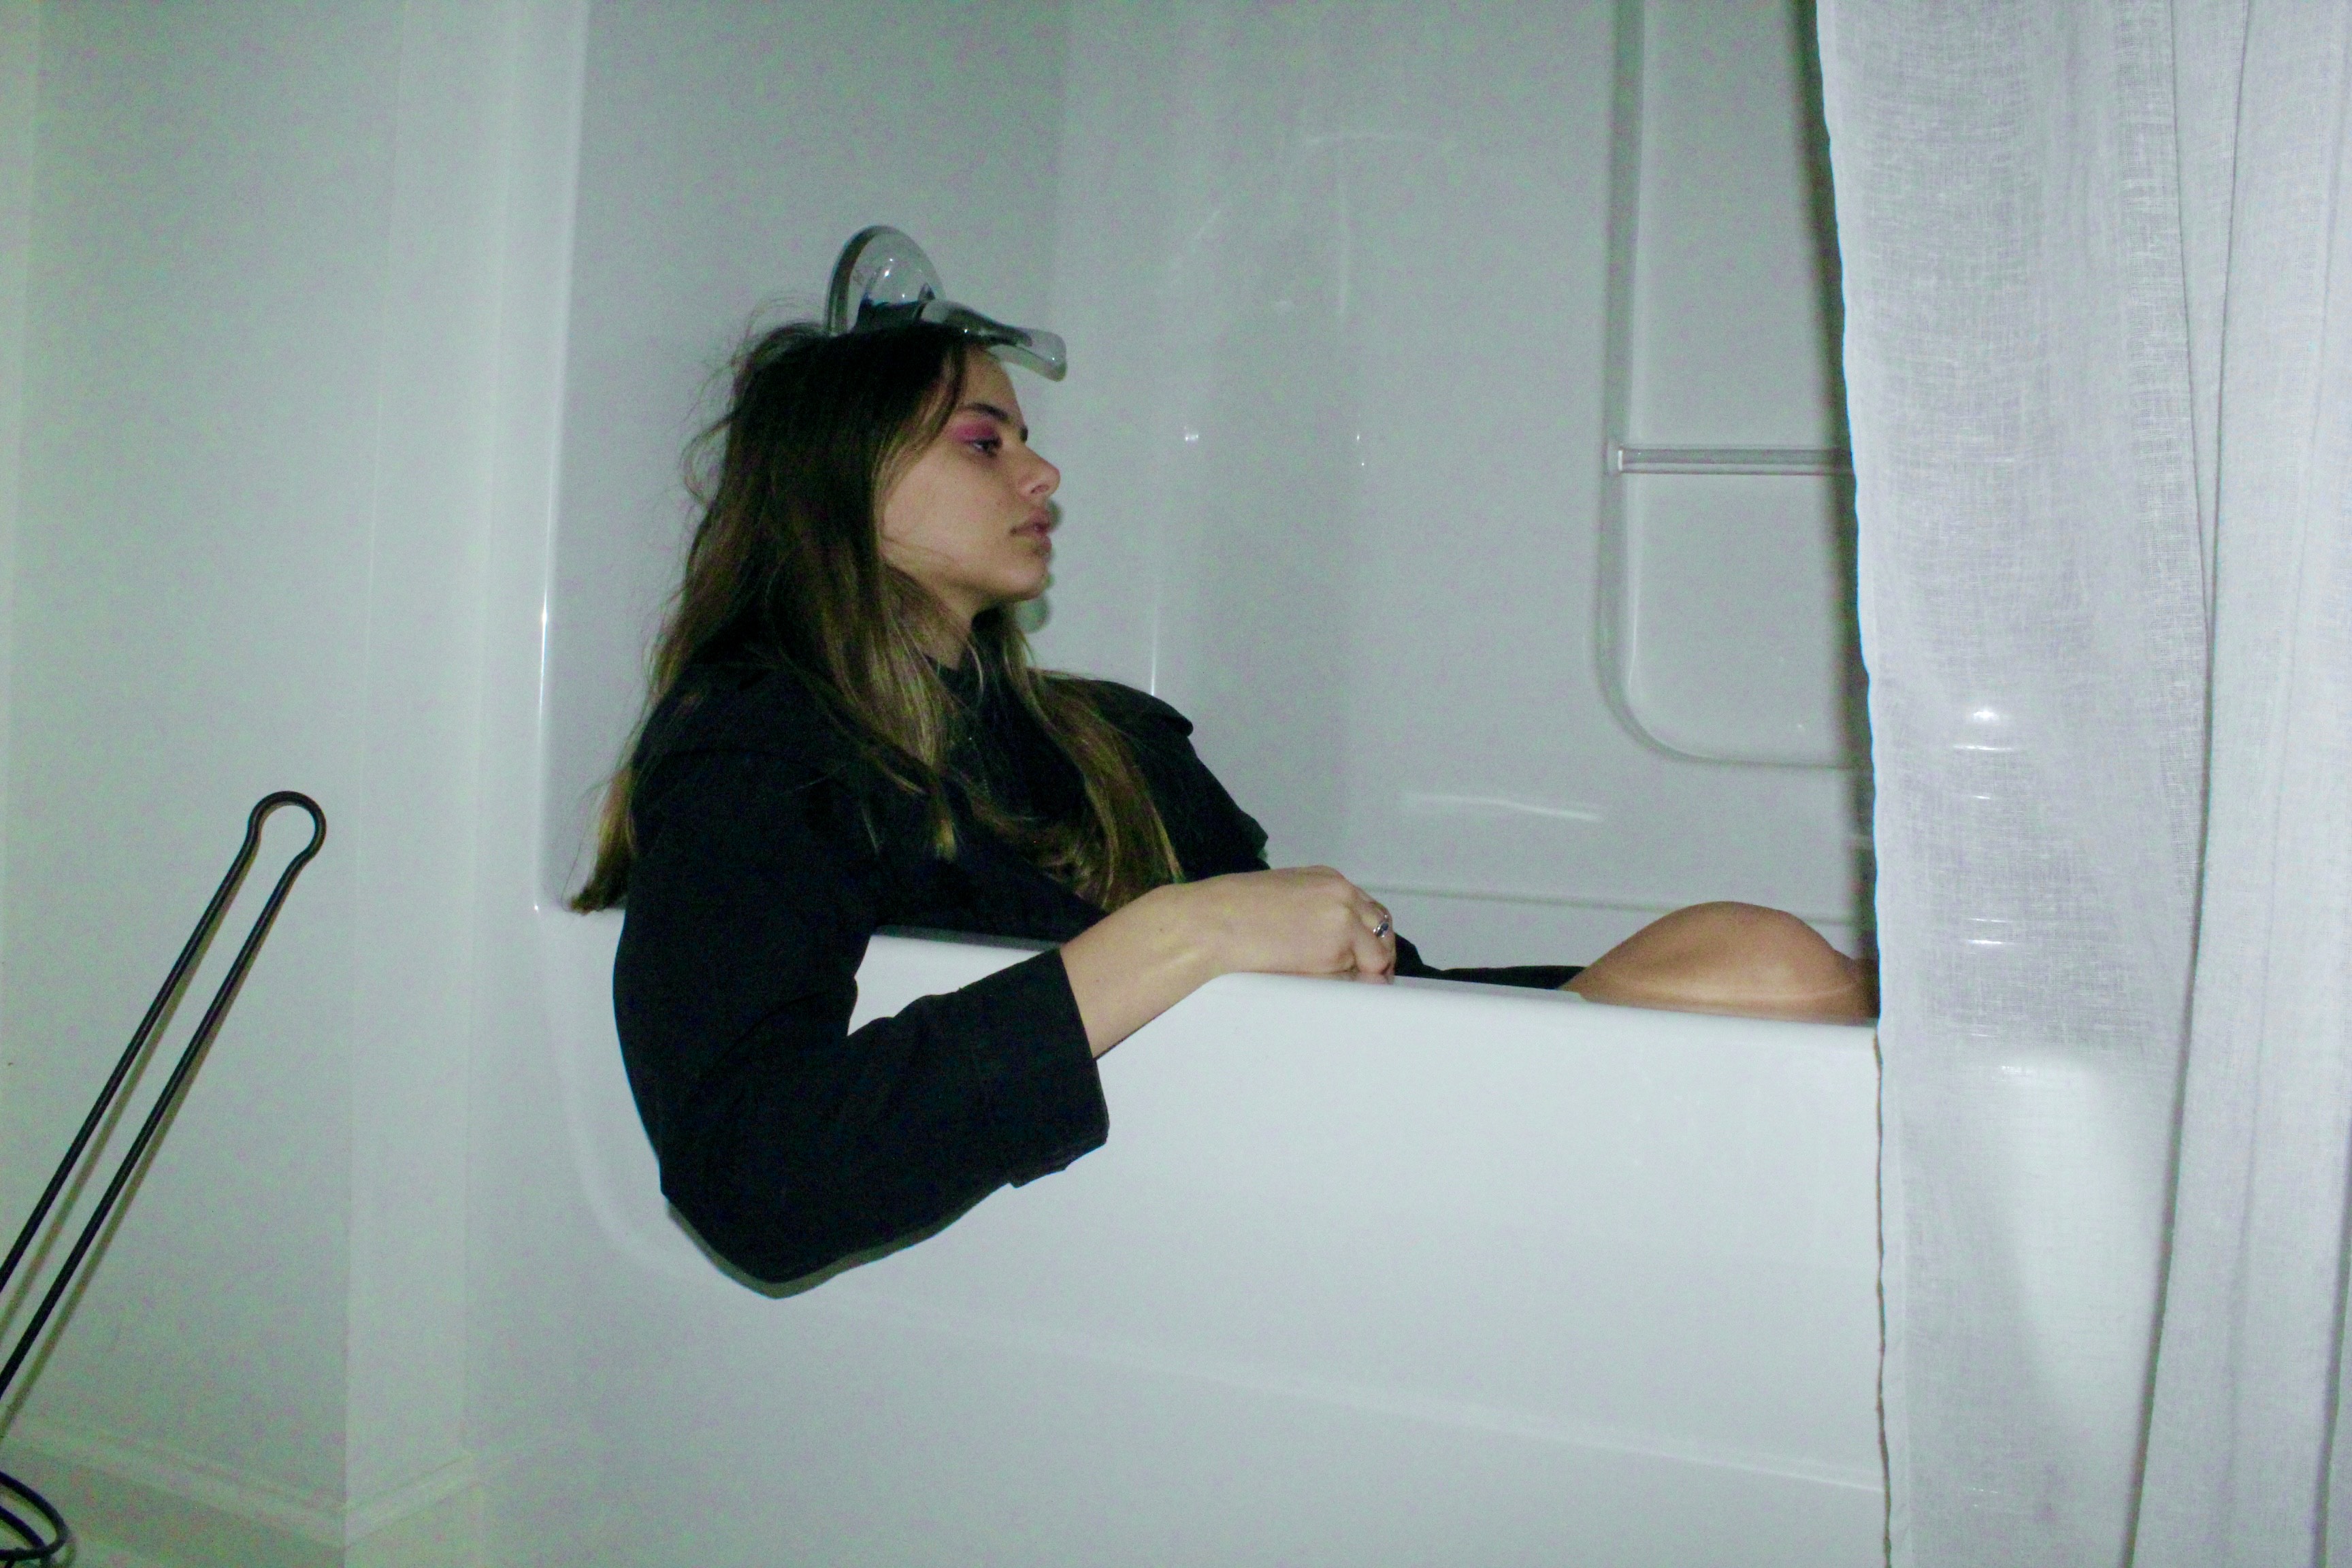 A person with messy hair and pink eyeshadow sits fully-clothed in a bathtub